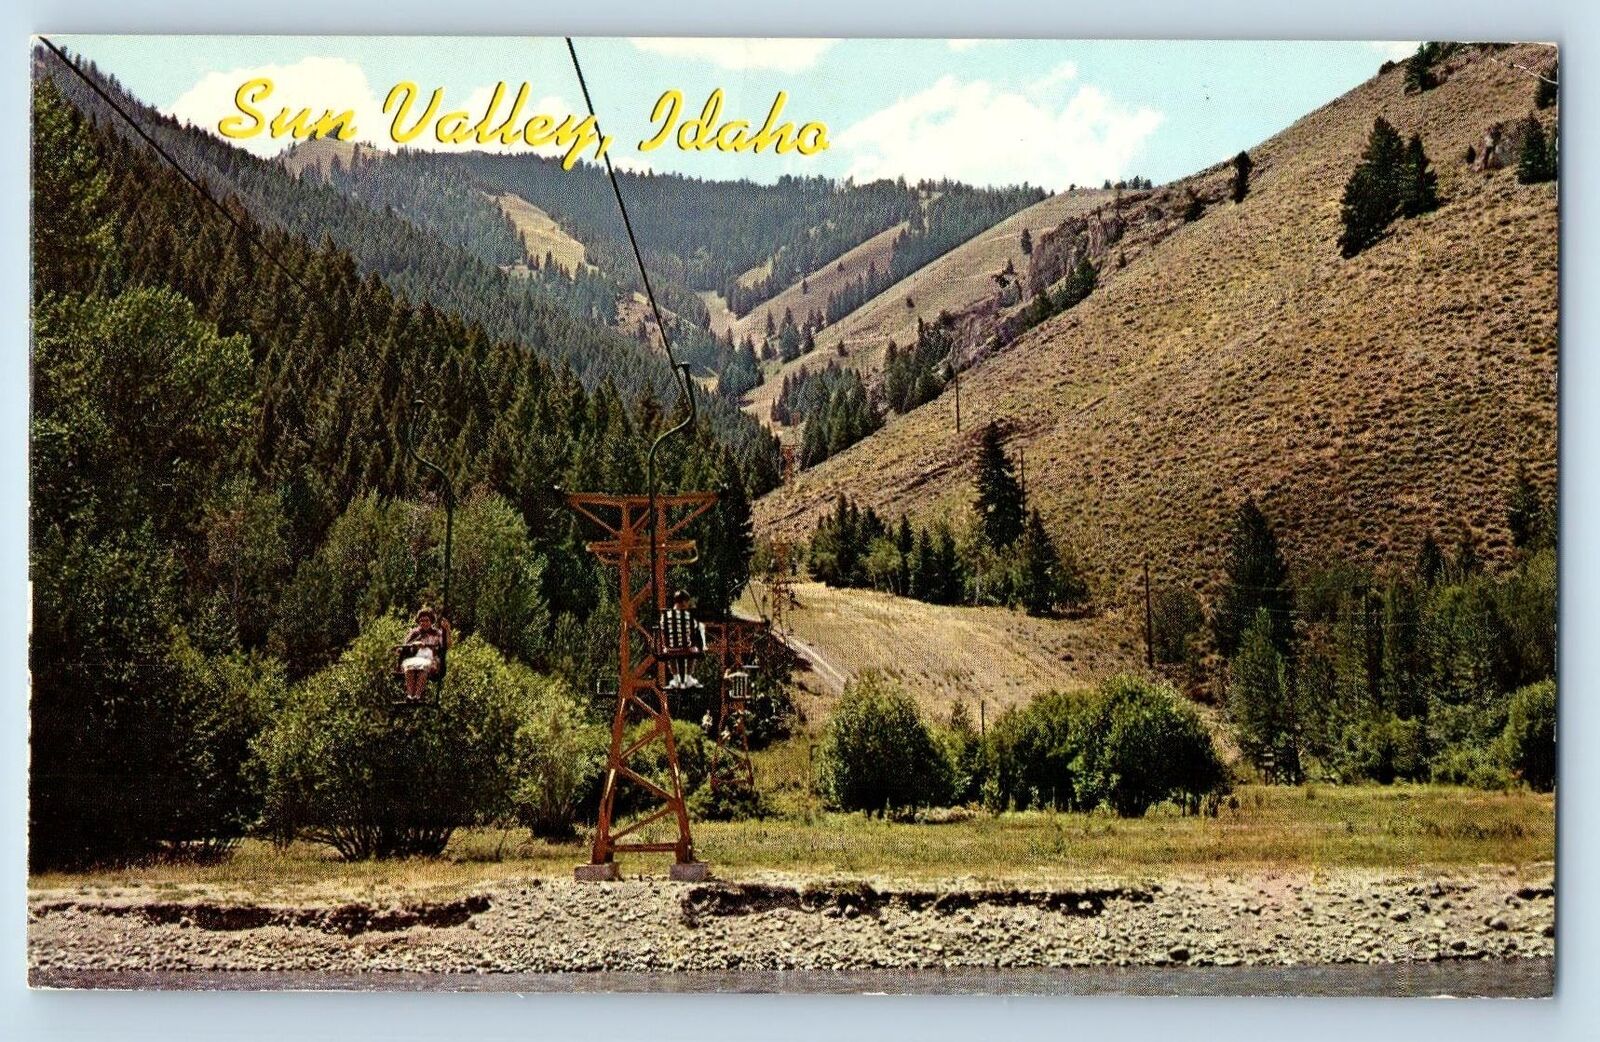 Sun Valley Idaho Postcard Tram Going Up Bald Mountain Scenic View 1970 Vintage